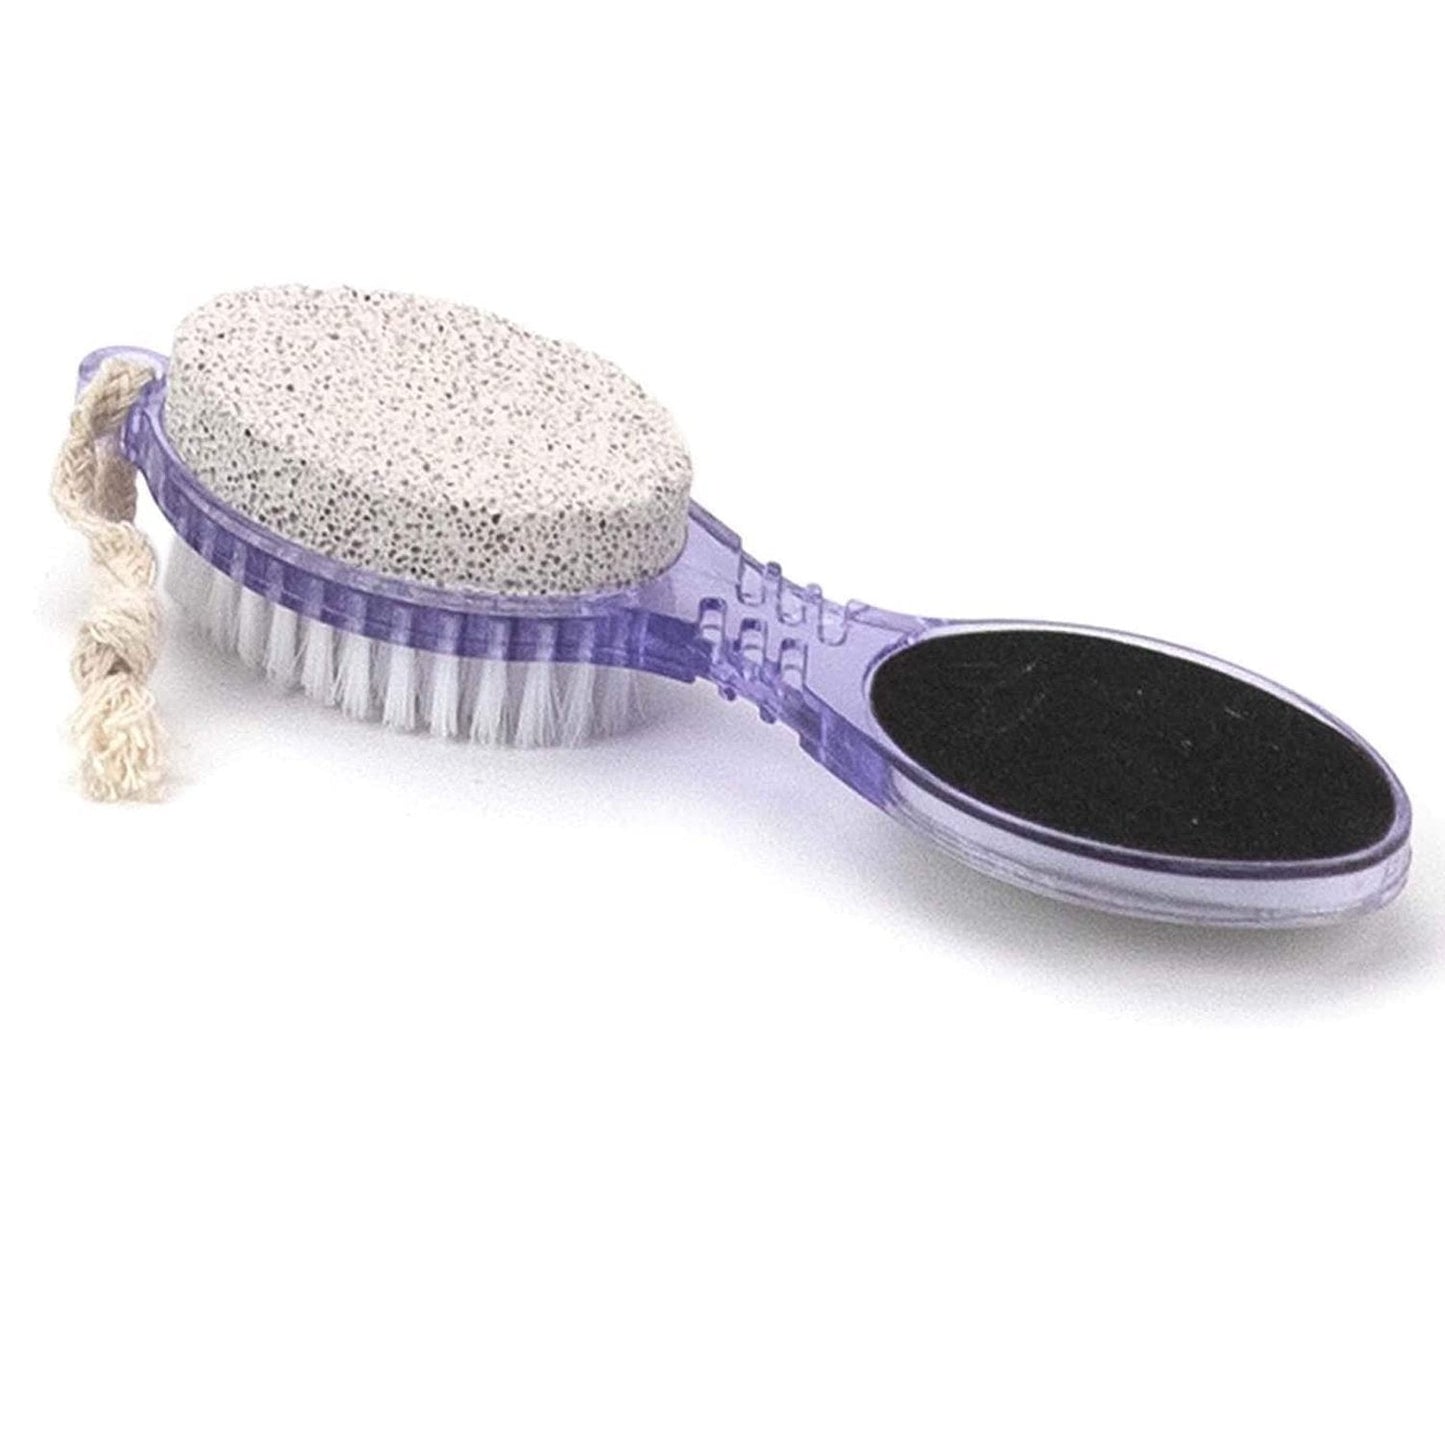 4 in 1 Pedicure Paddle Kit Tool with Pumice Stone for Feet